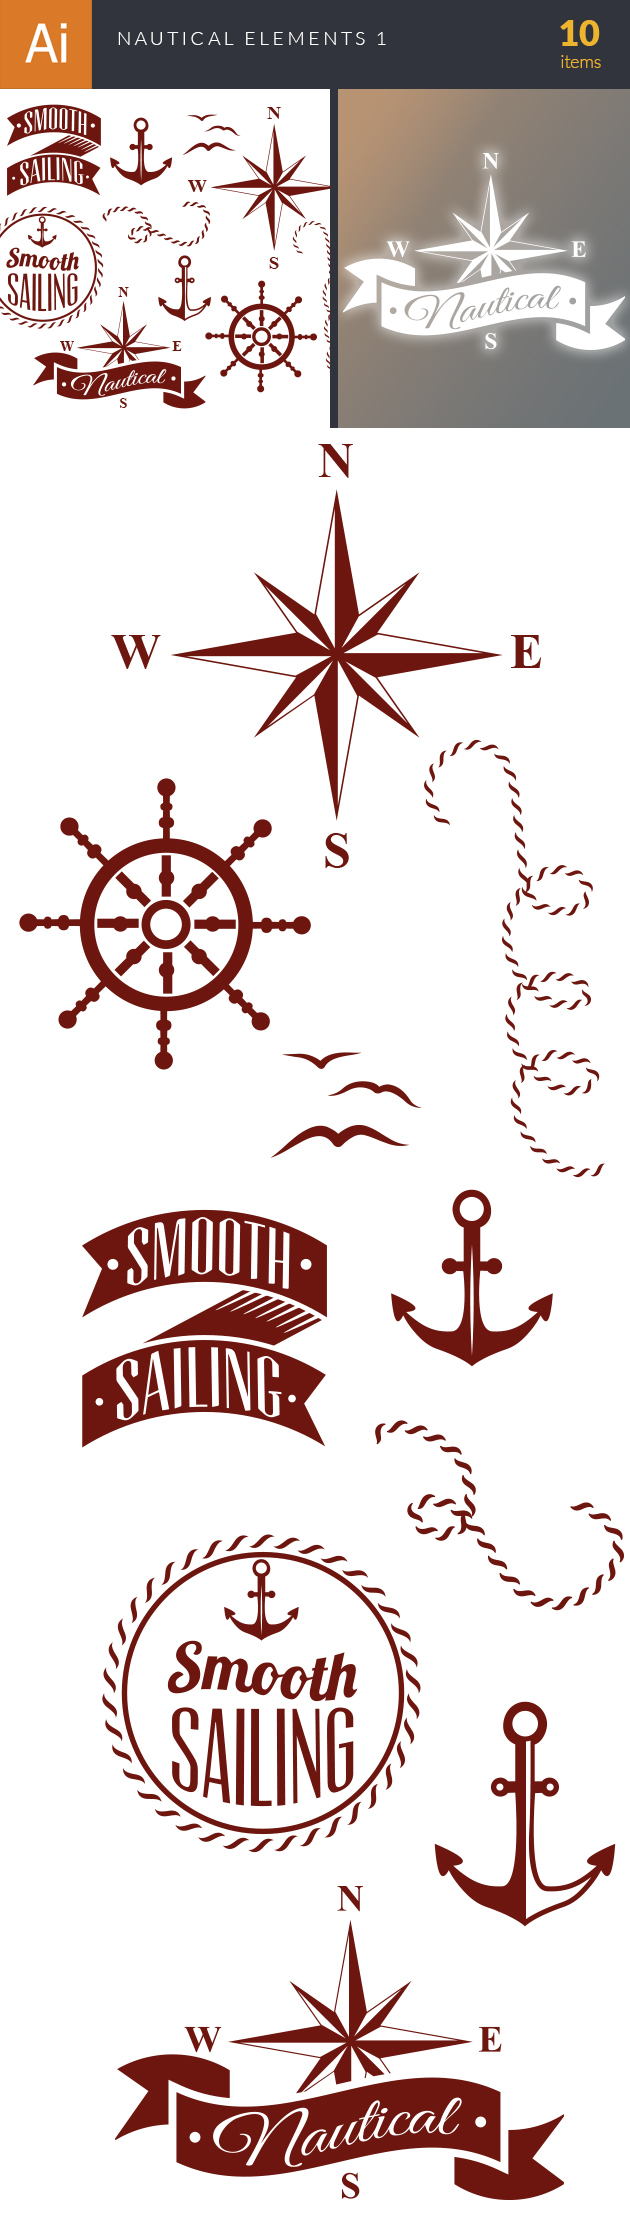 Nautical label with elements vector material